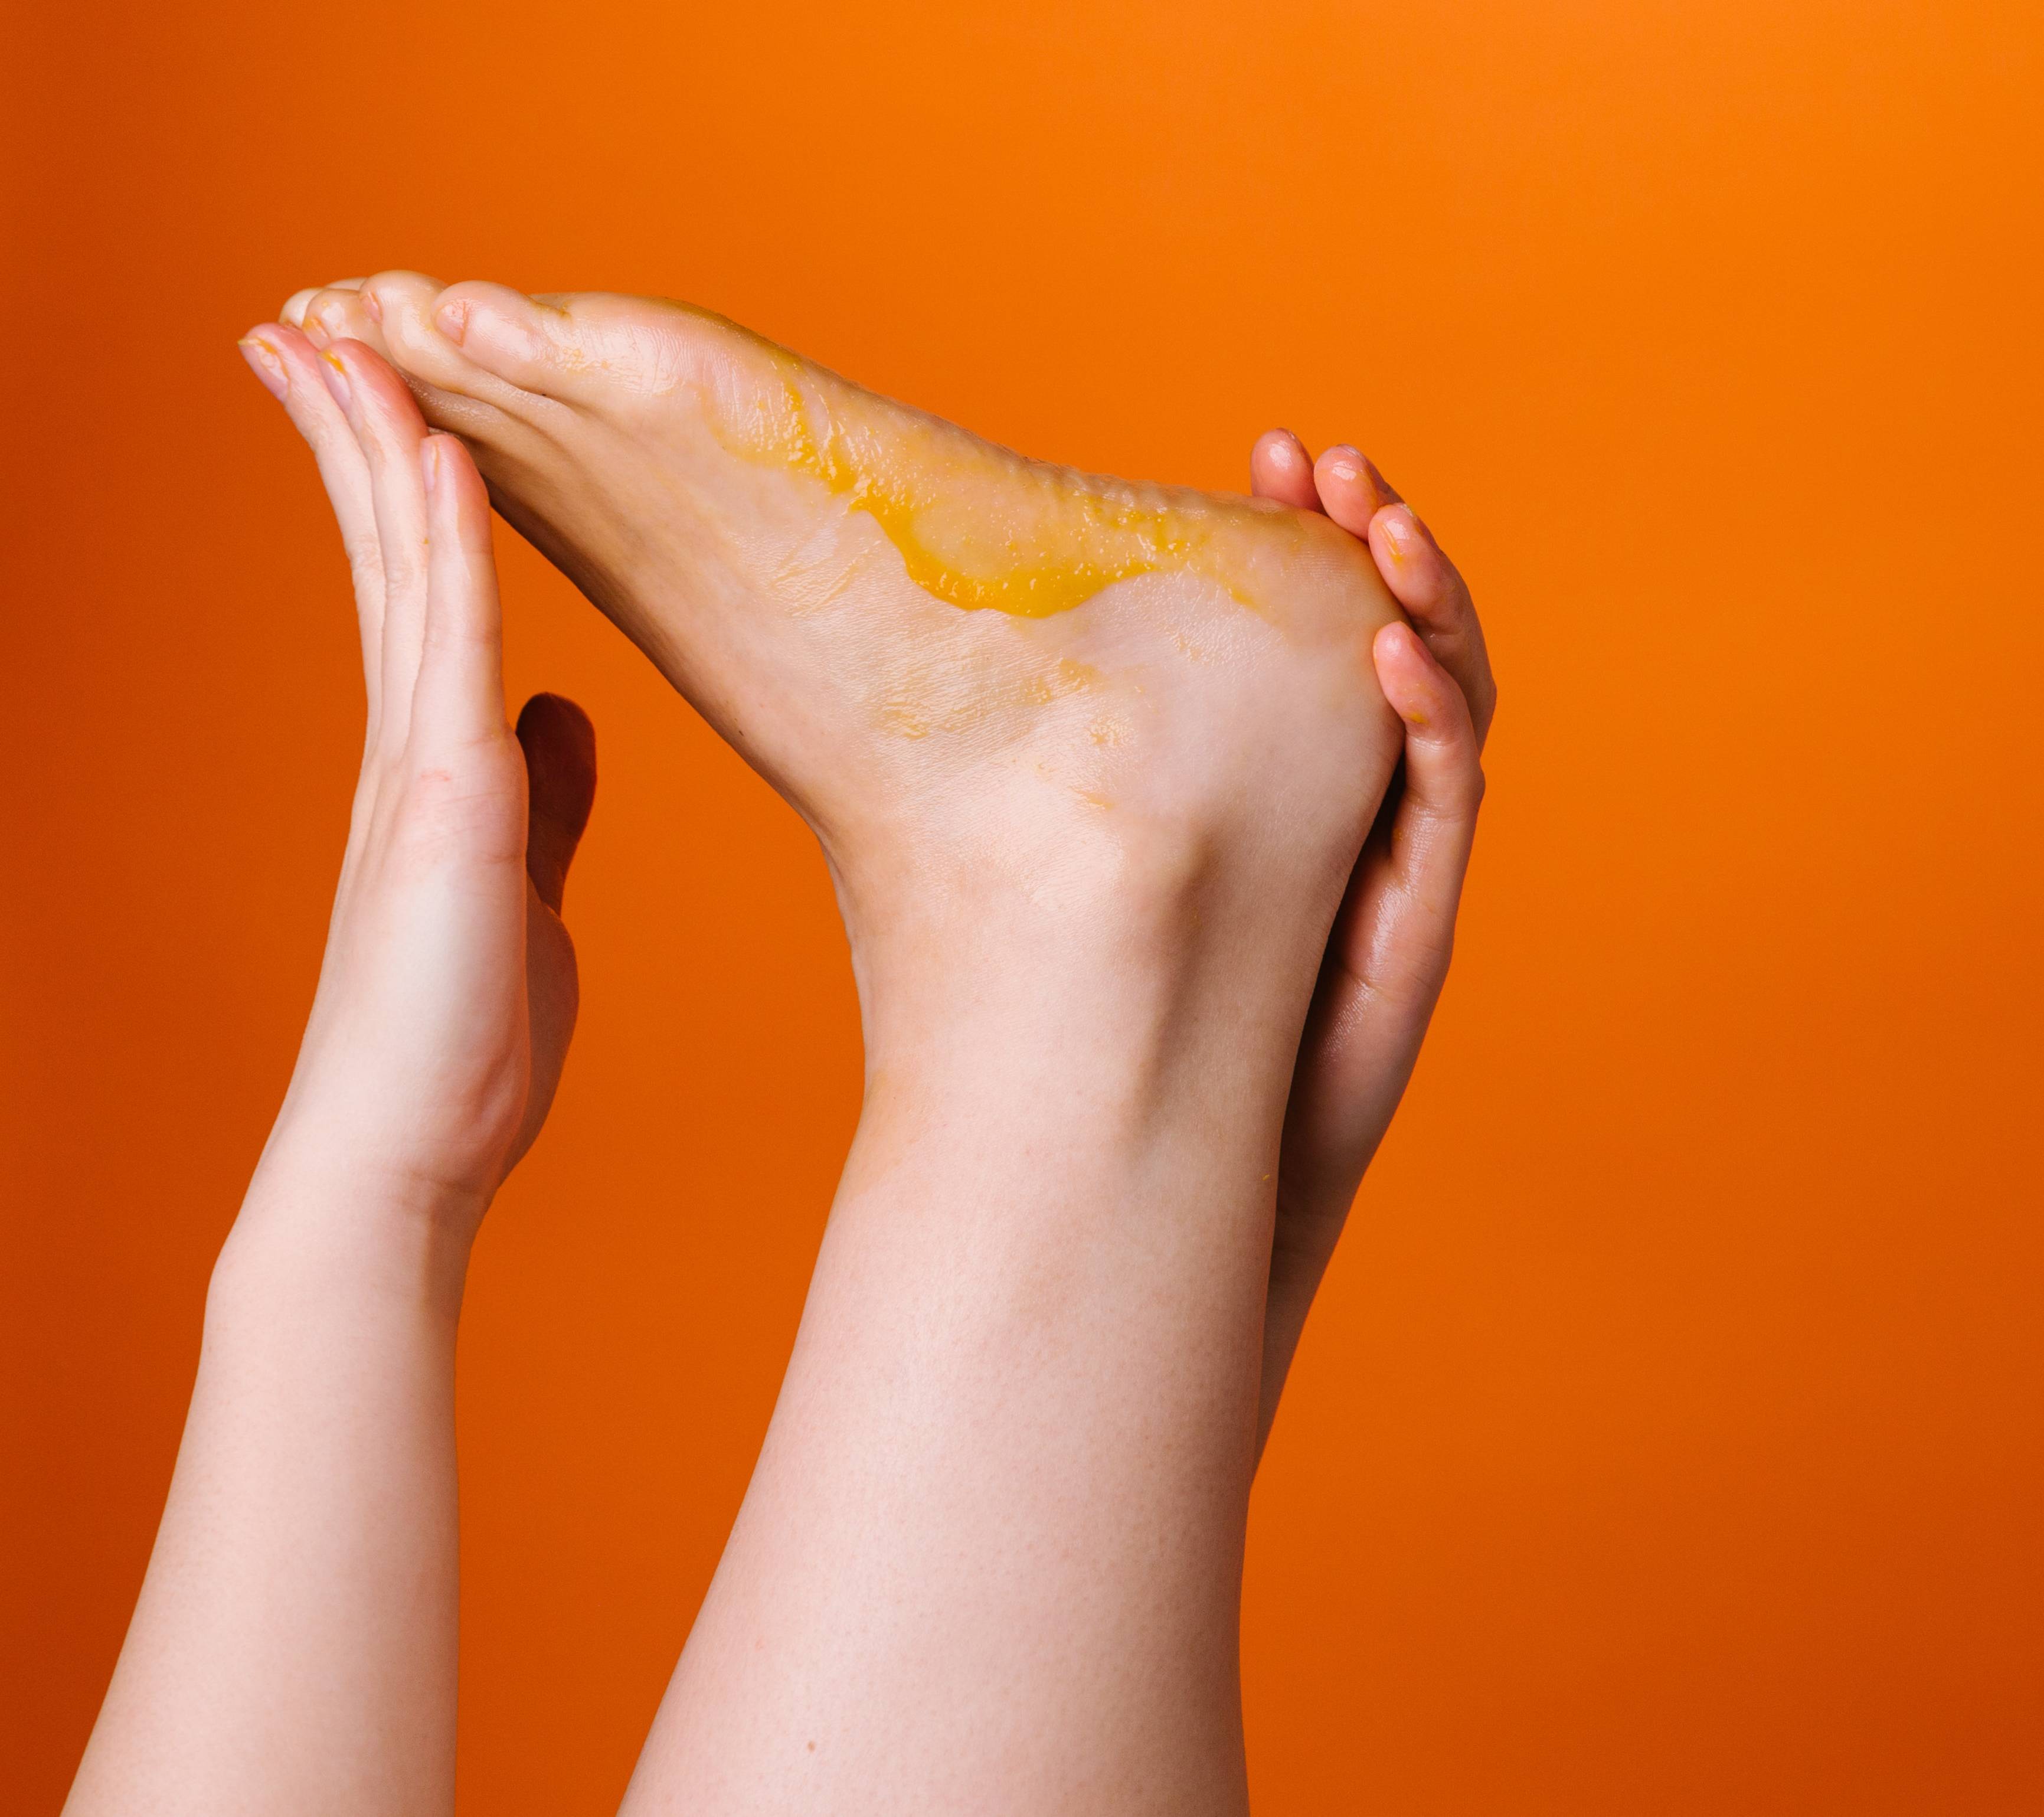 In front of an orange backdrop, a foot is being stretched by two hands, with its sole facing upwards, coated in an orange balm.